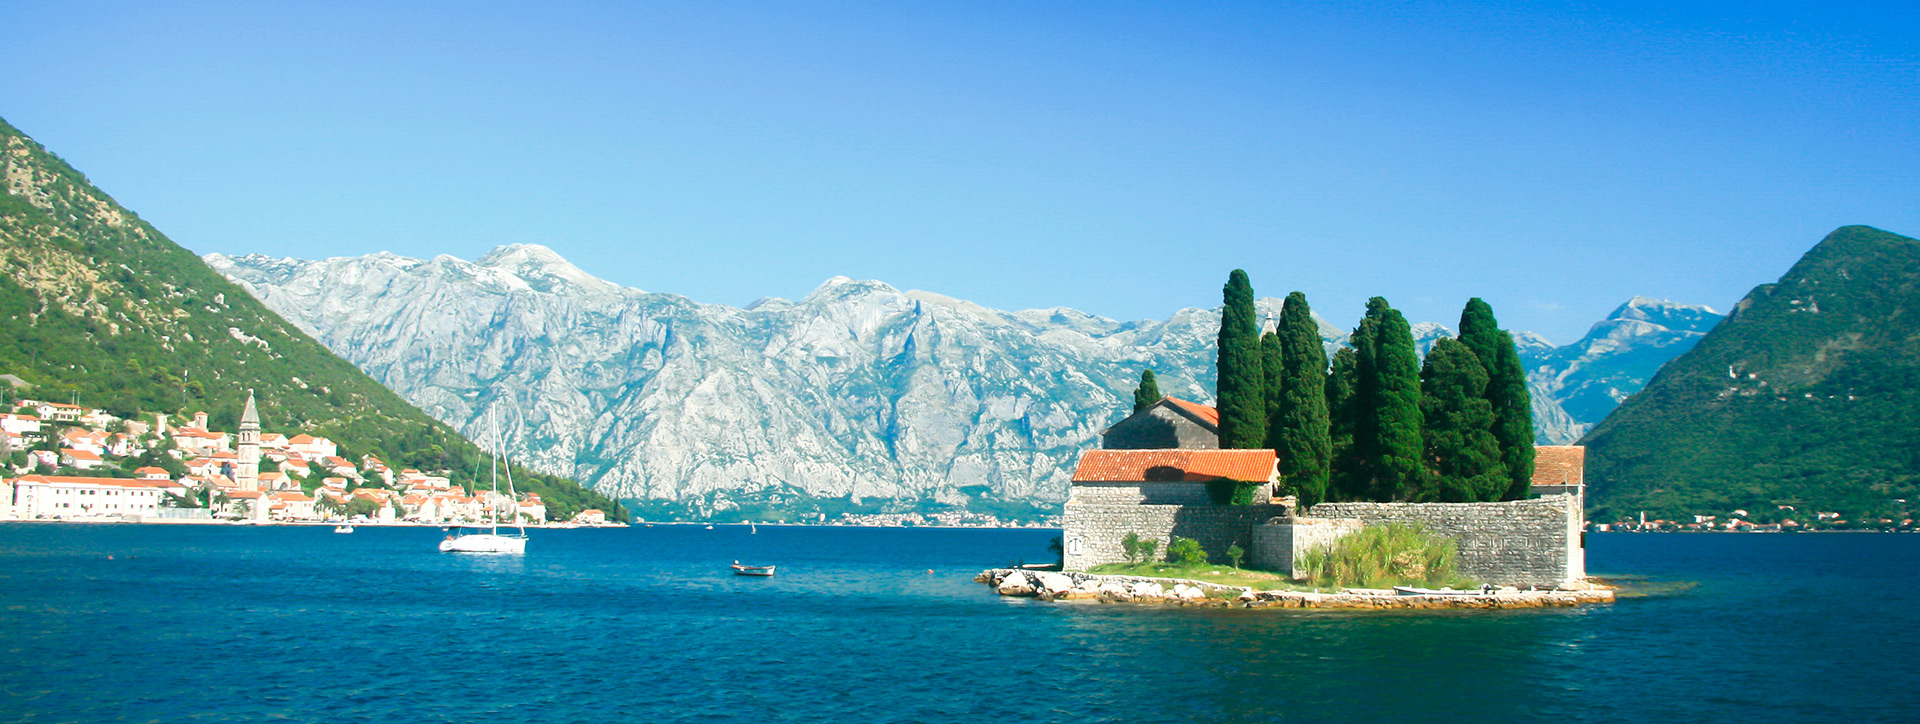 View of the town of Perast from the island of St. George, Montenegro - Adriatic sailing routes of SimpleSail